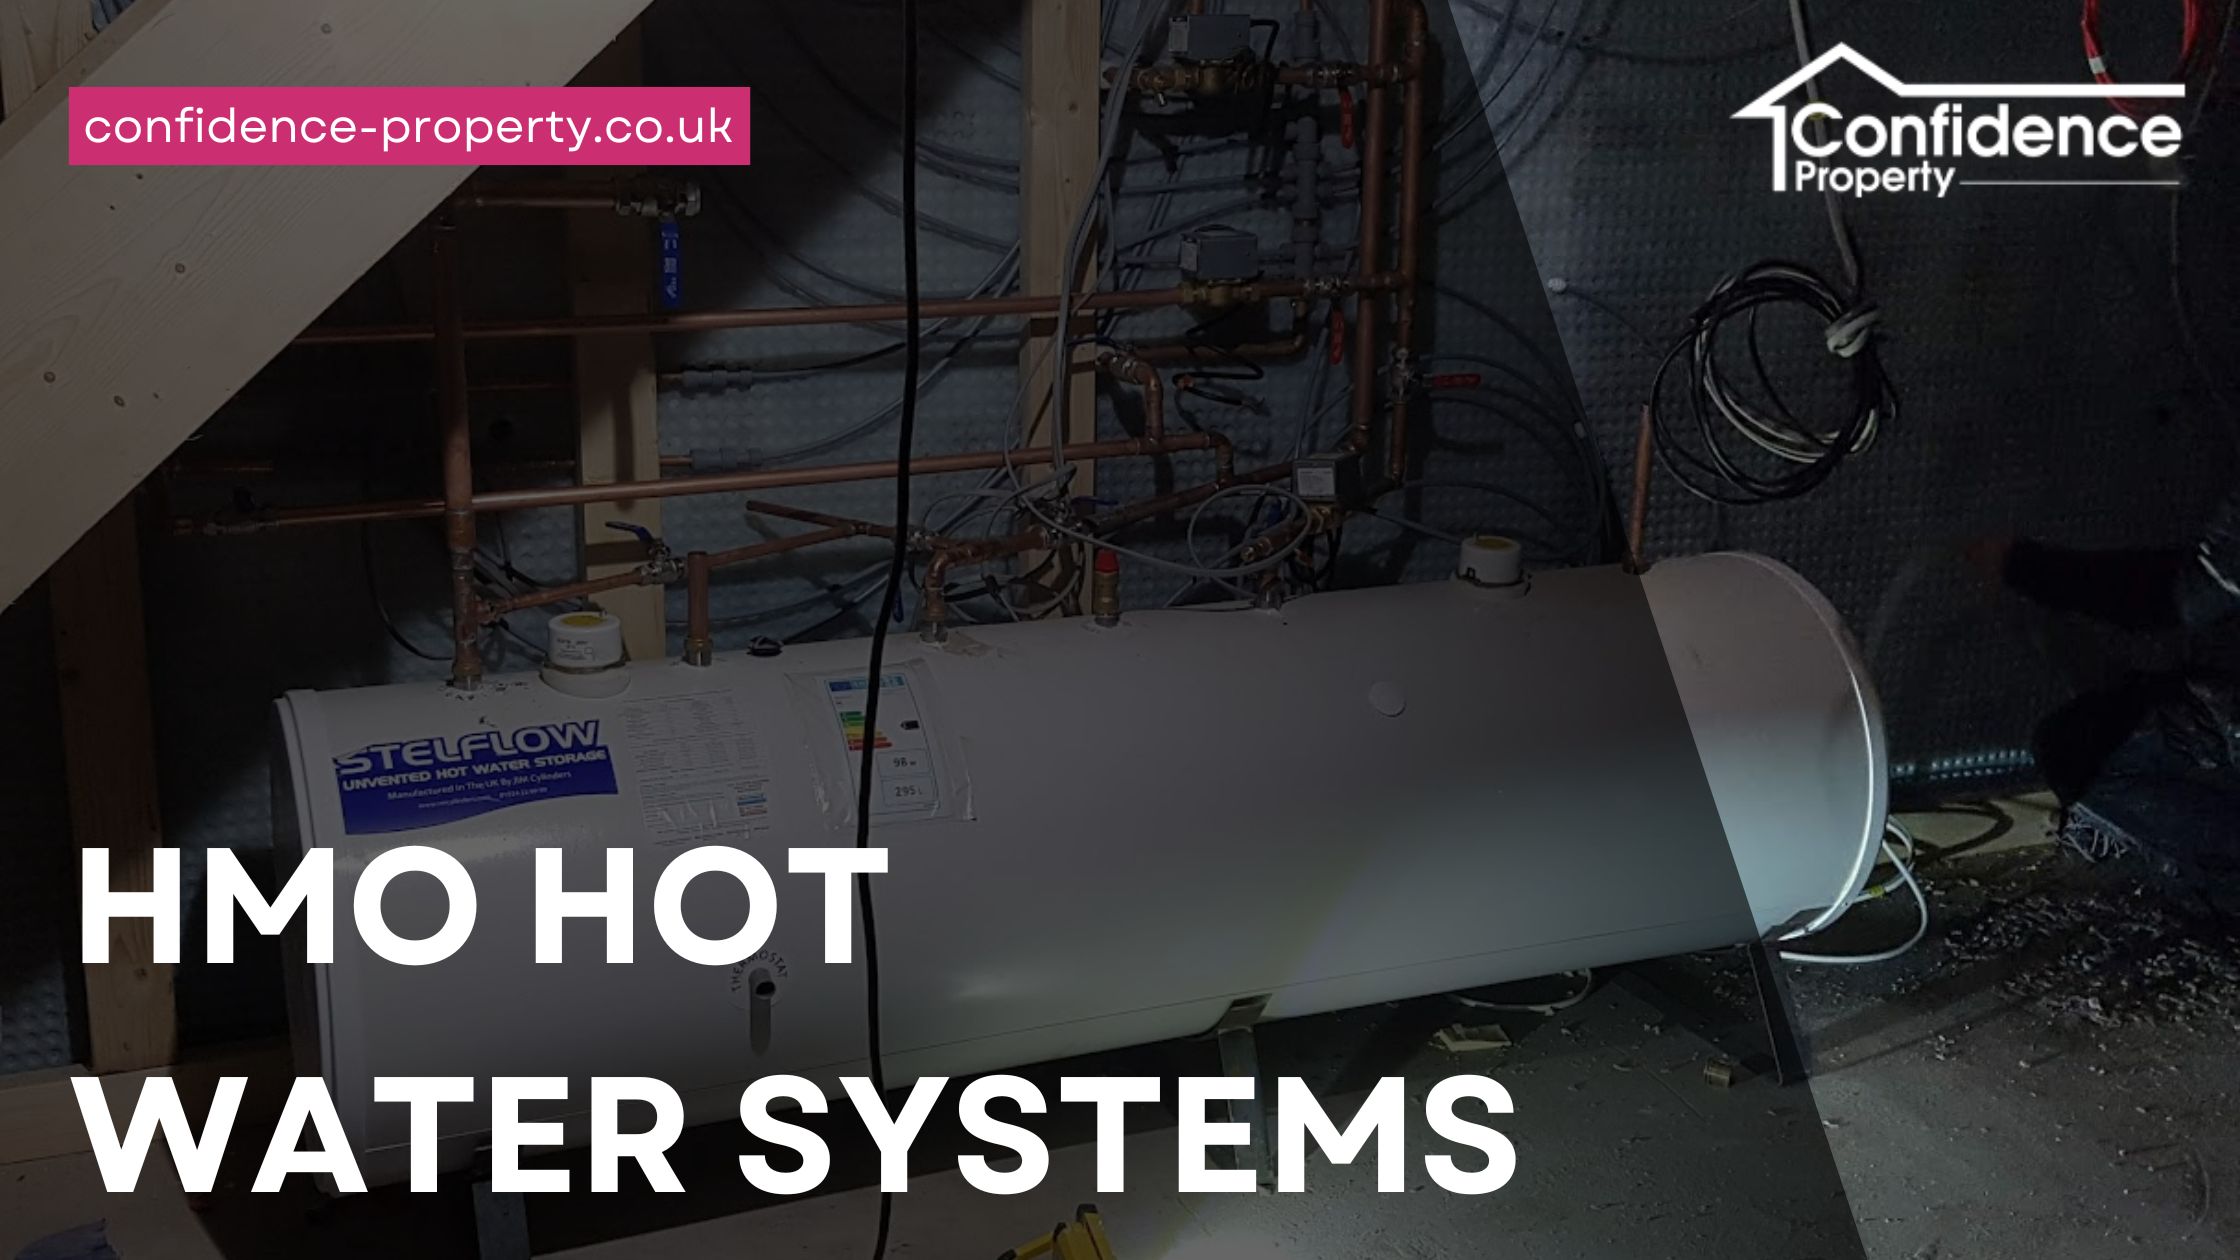 HMO hot water systems